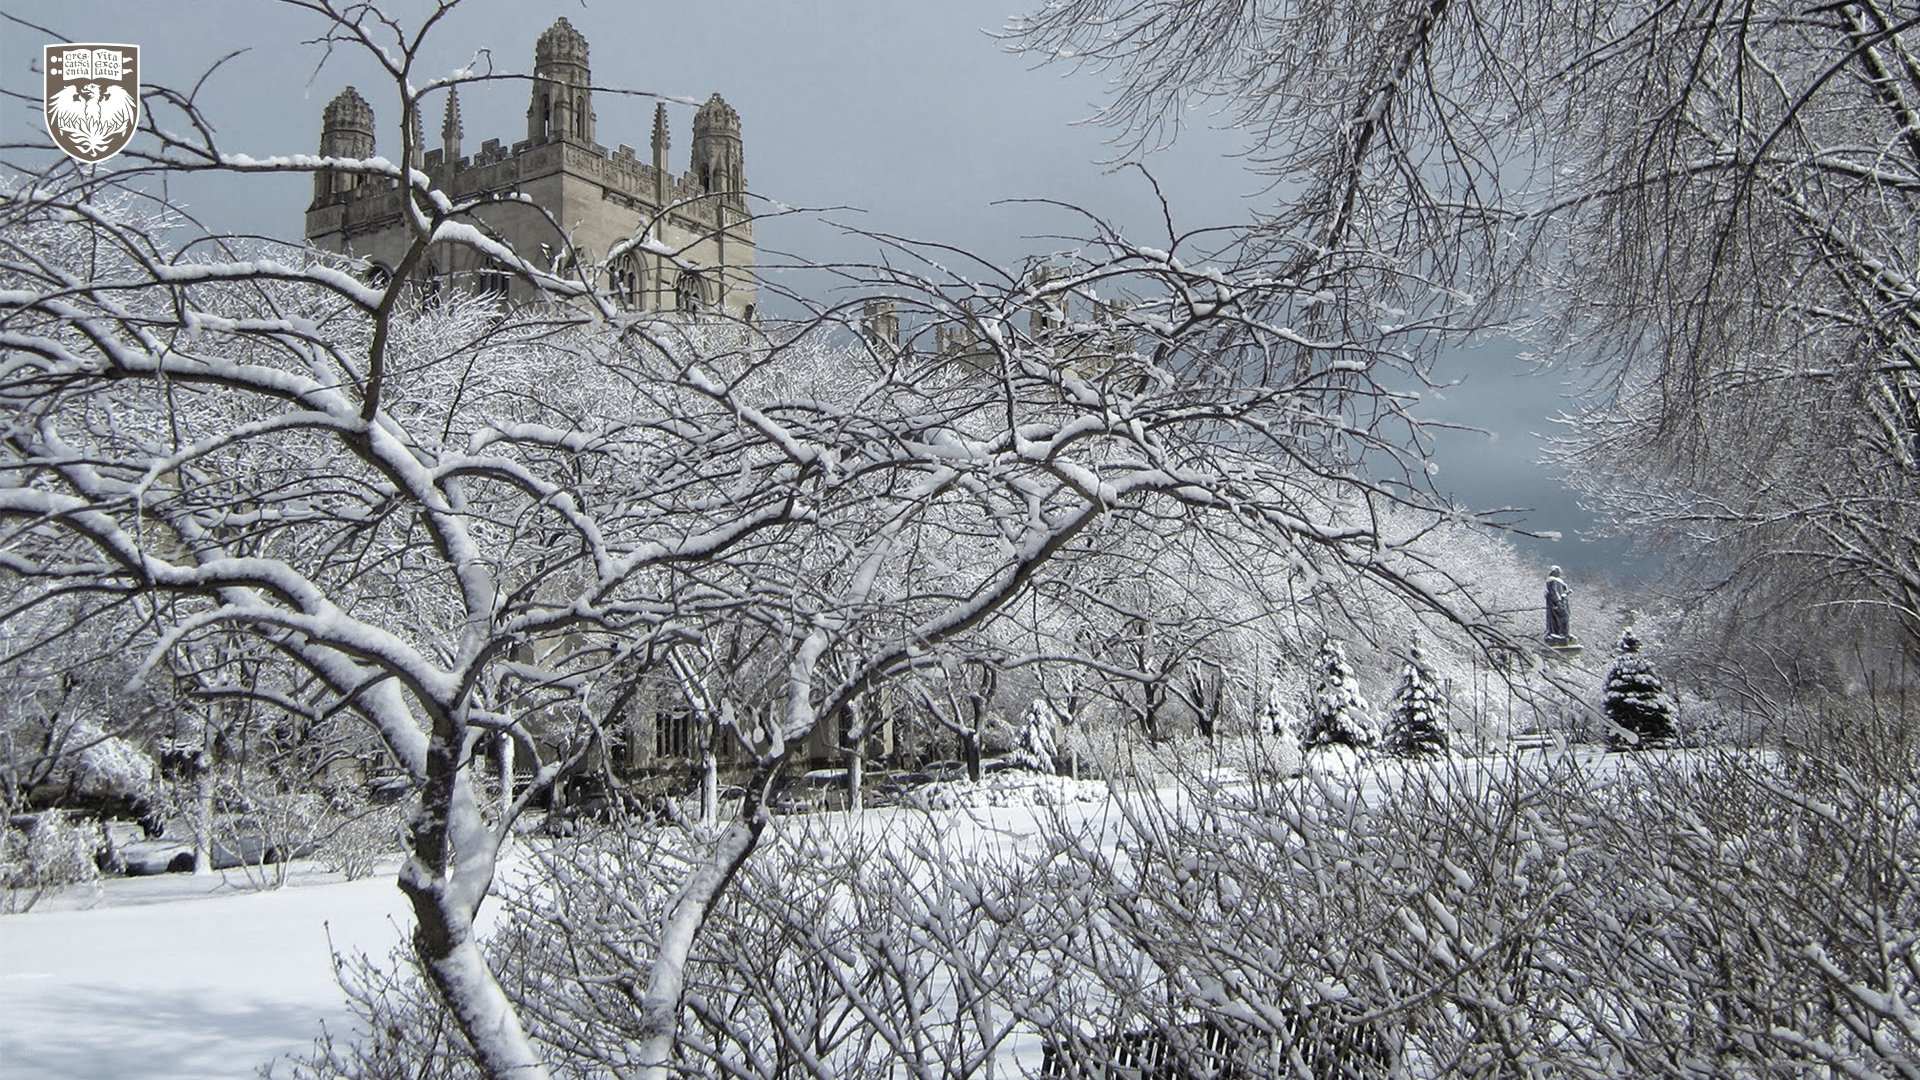 Snow covering tree branches with Gothic architecture in the background